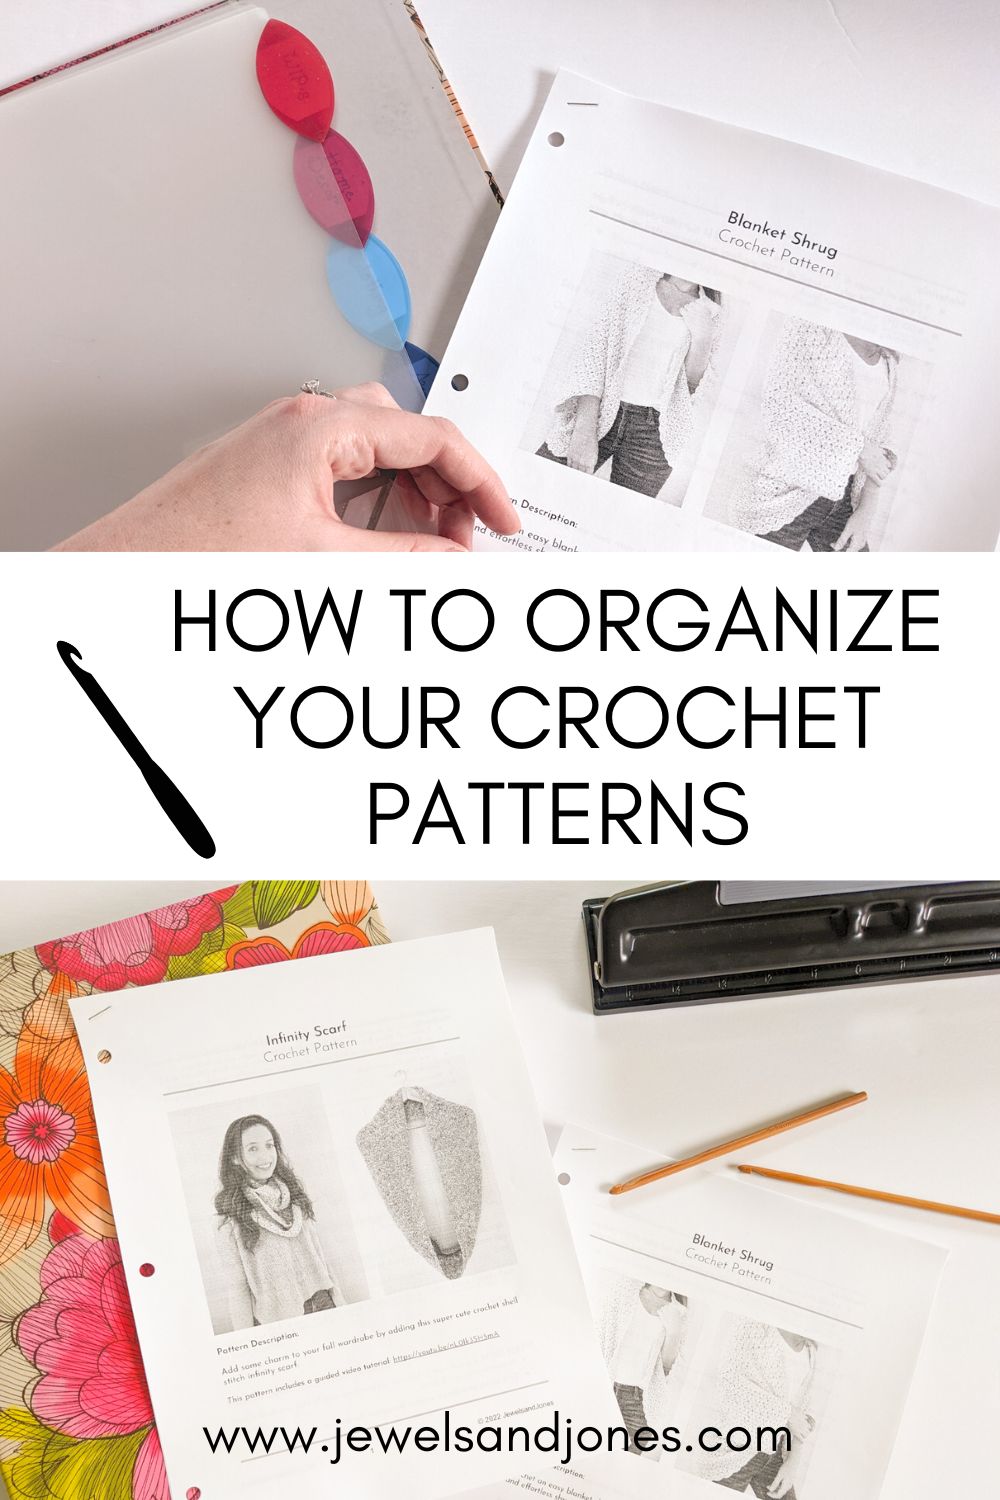 How to store and organize your patterns.